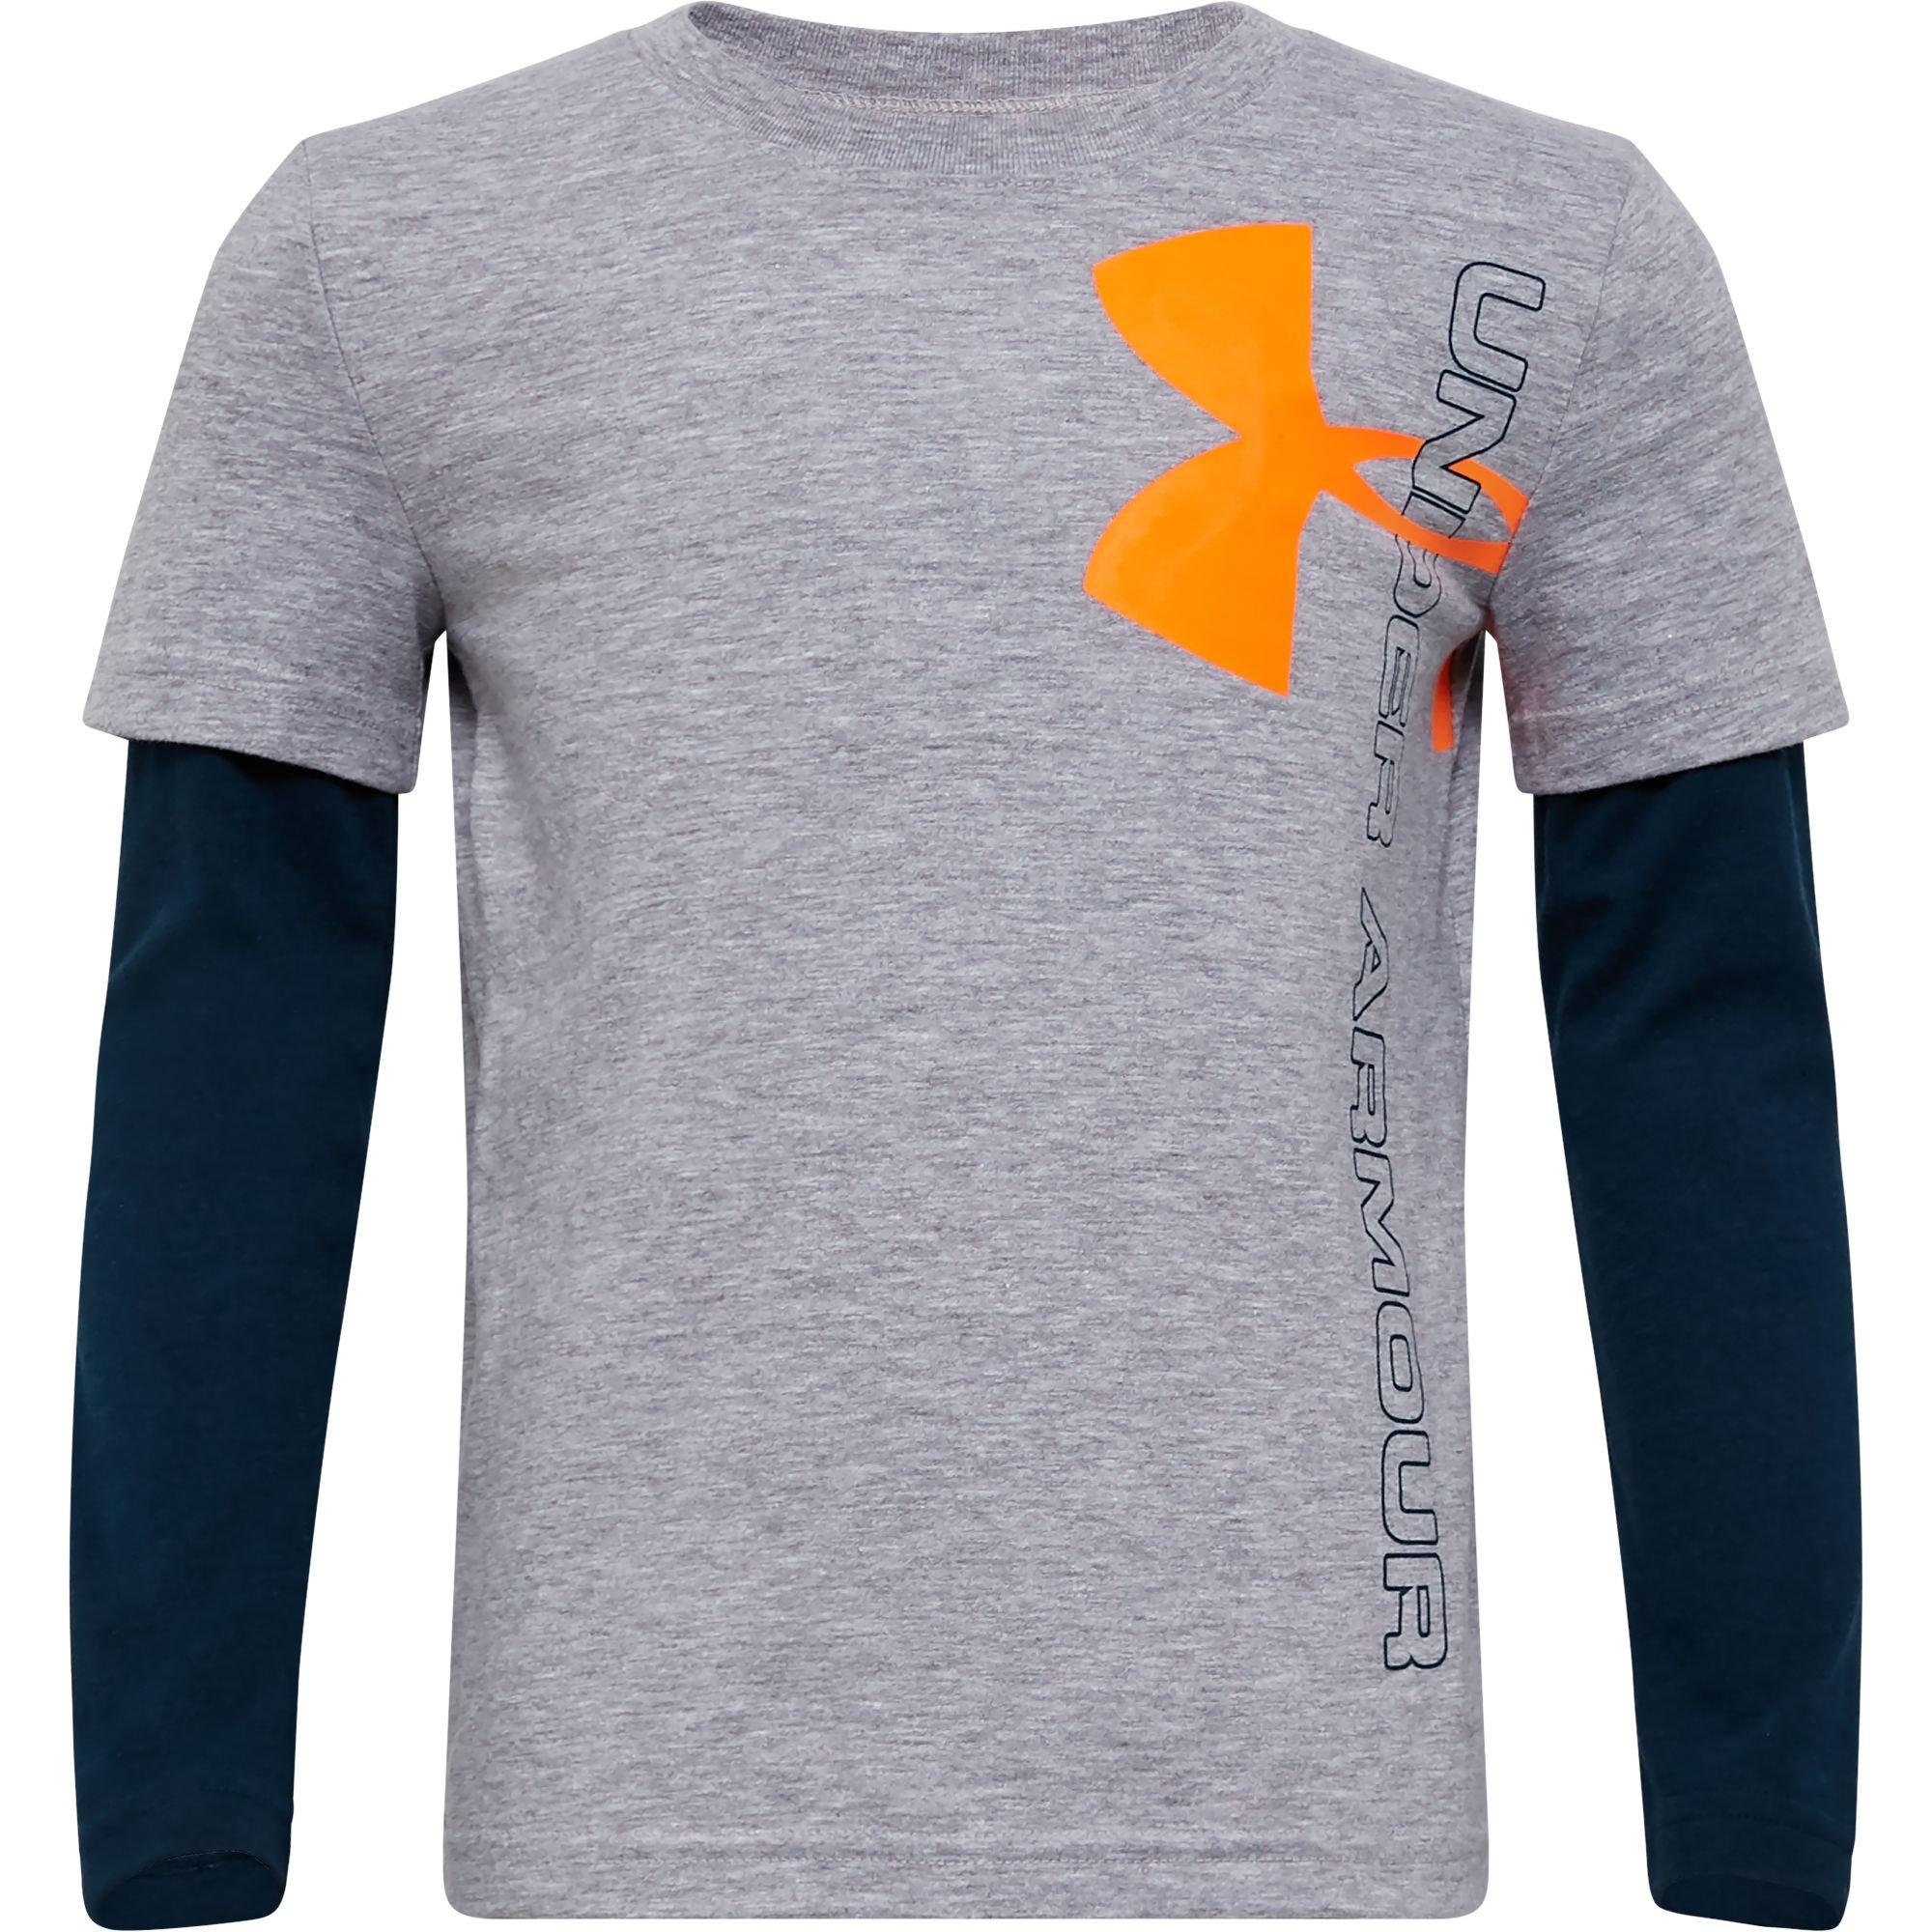 clearance under armour sweatshirts